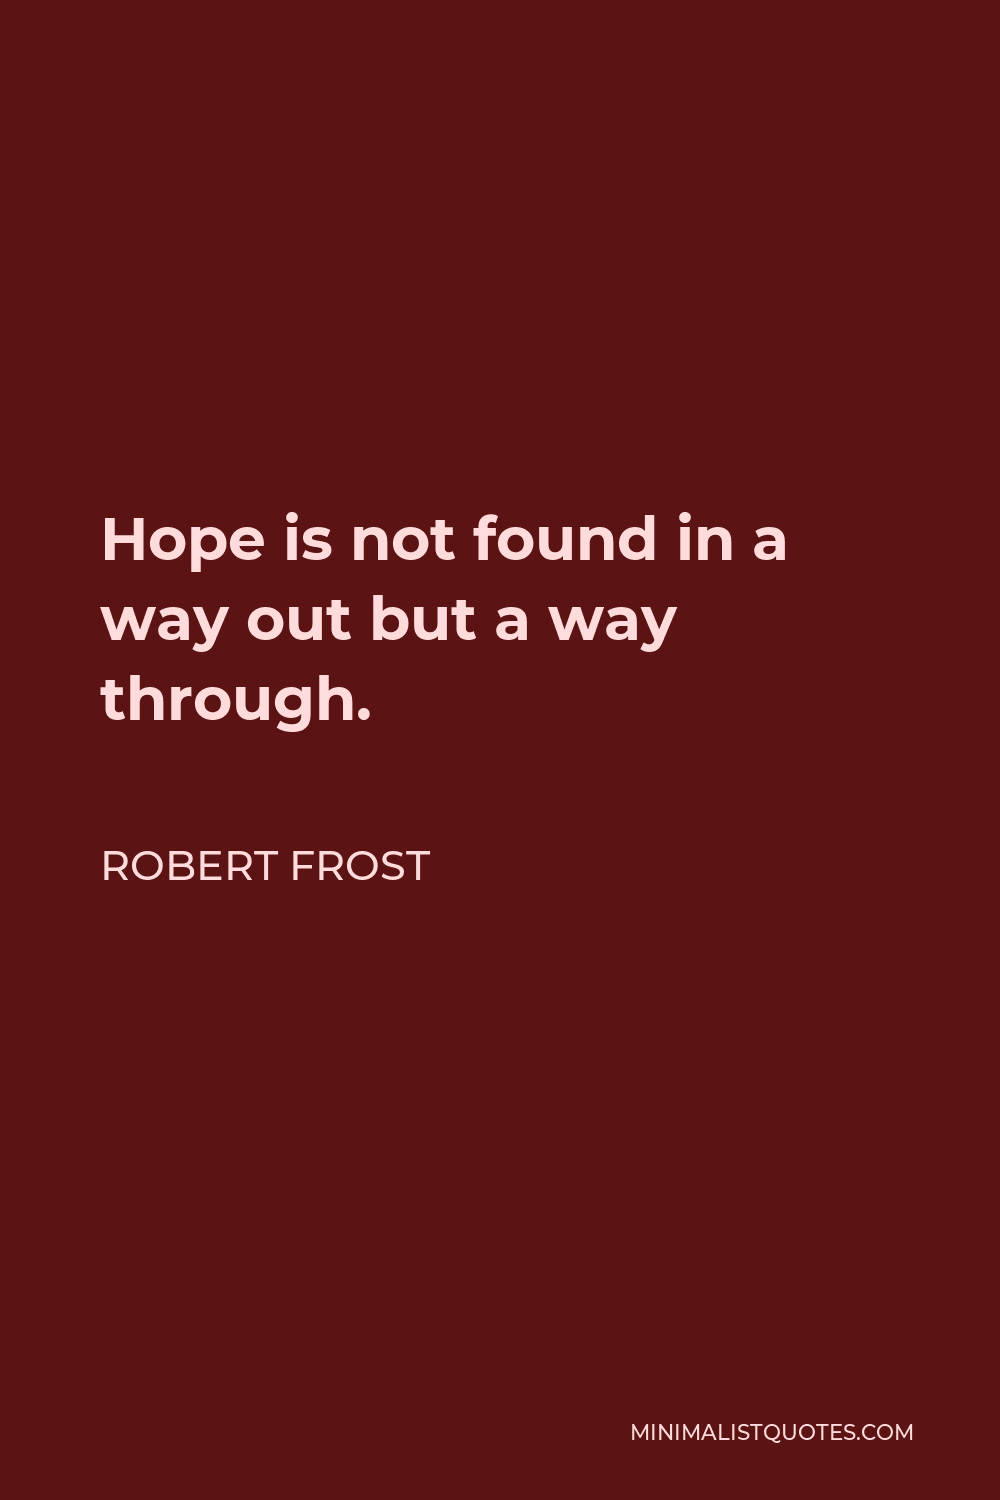 Robert Frost Quote - Hope is not found in a way out but a way through.